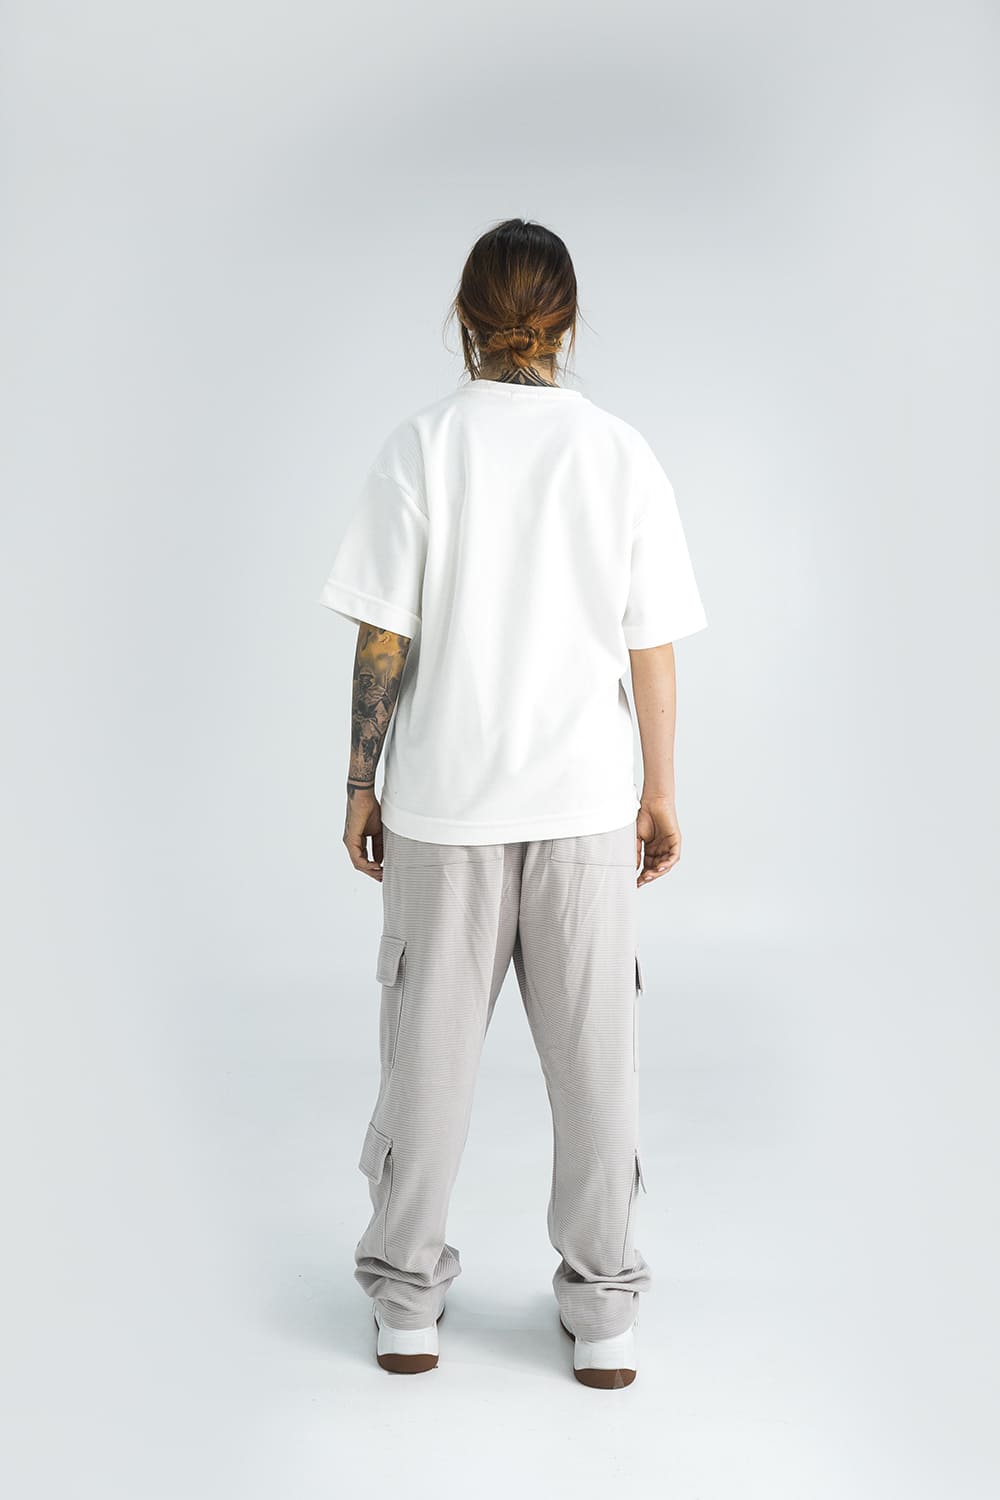 BCO 2.0 Textured Cargo Pants - SAND 8182